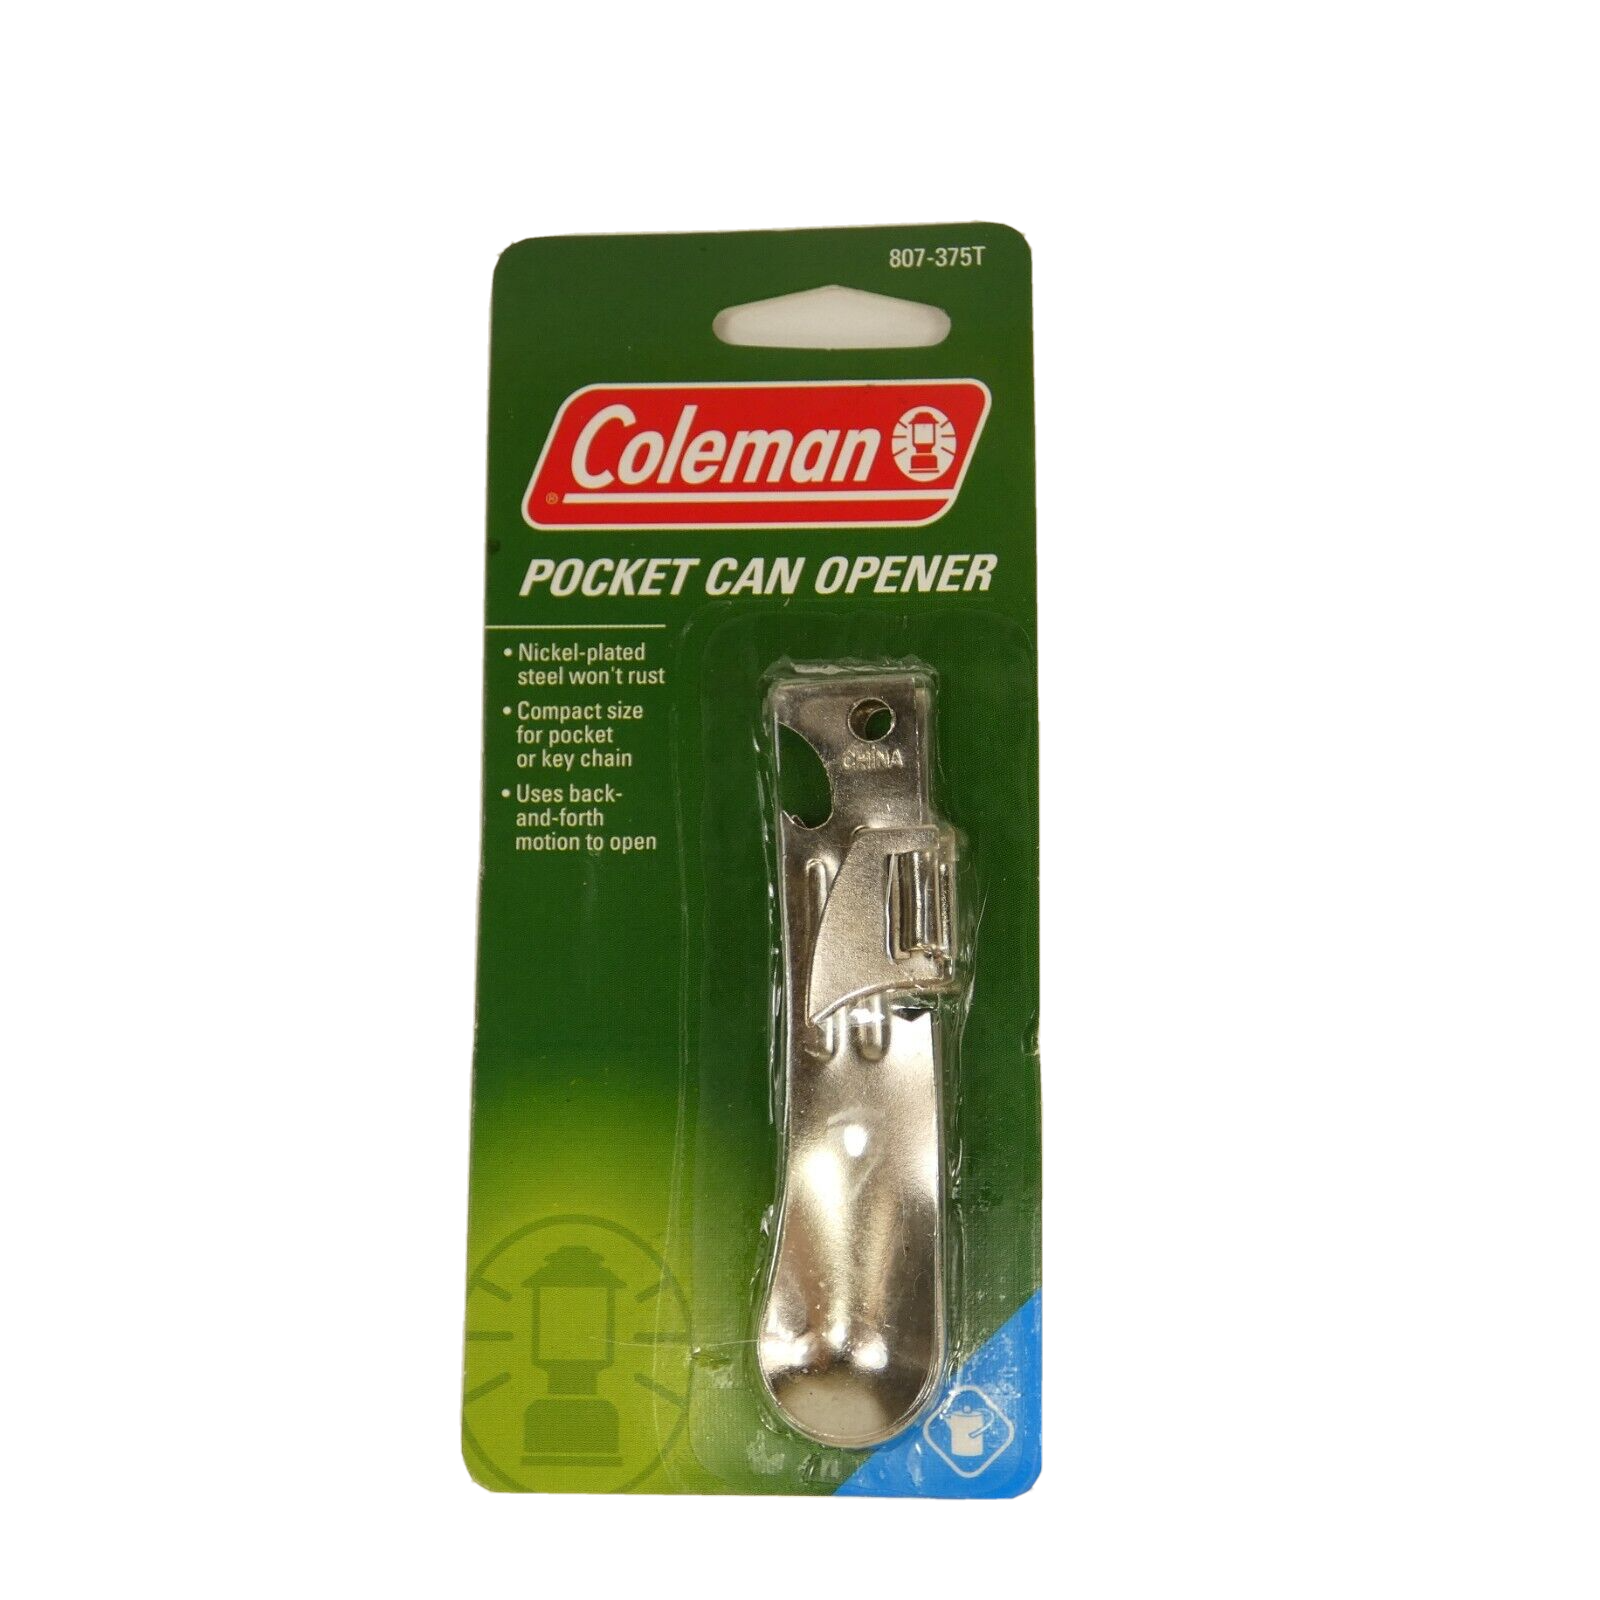 Coleman Pocket Can Opener 2 Pack New  Nickle plated steel. Camping / Survival - $3.49